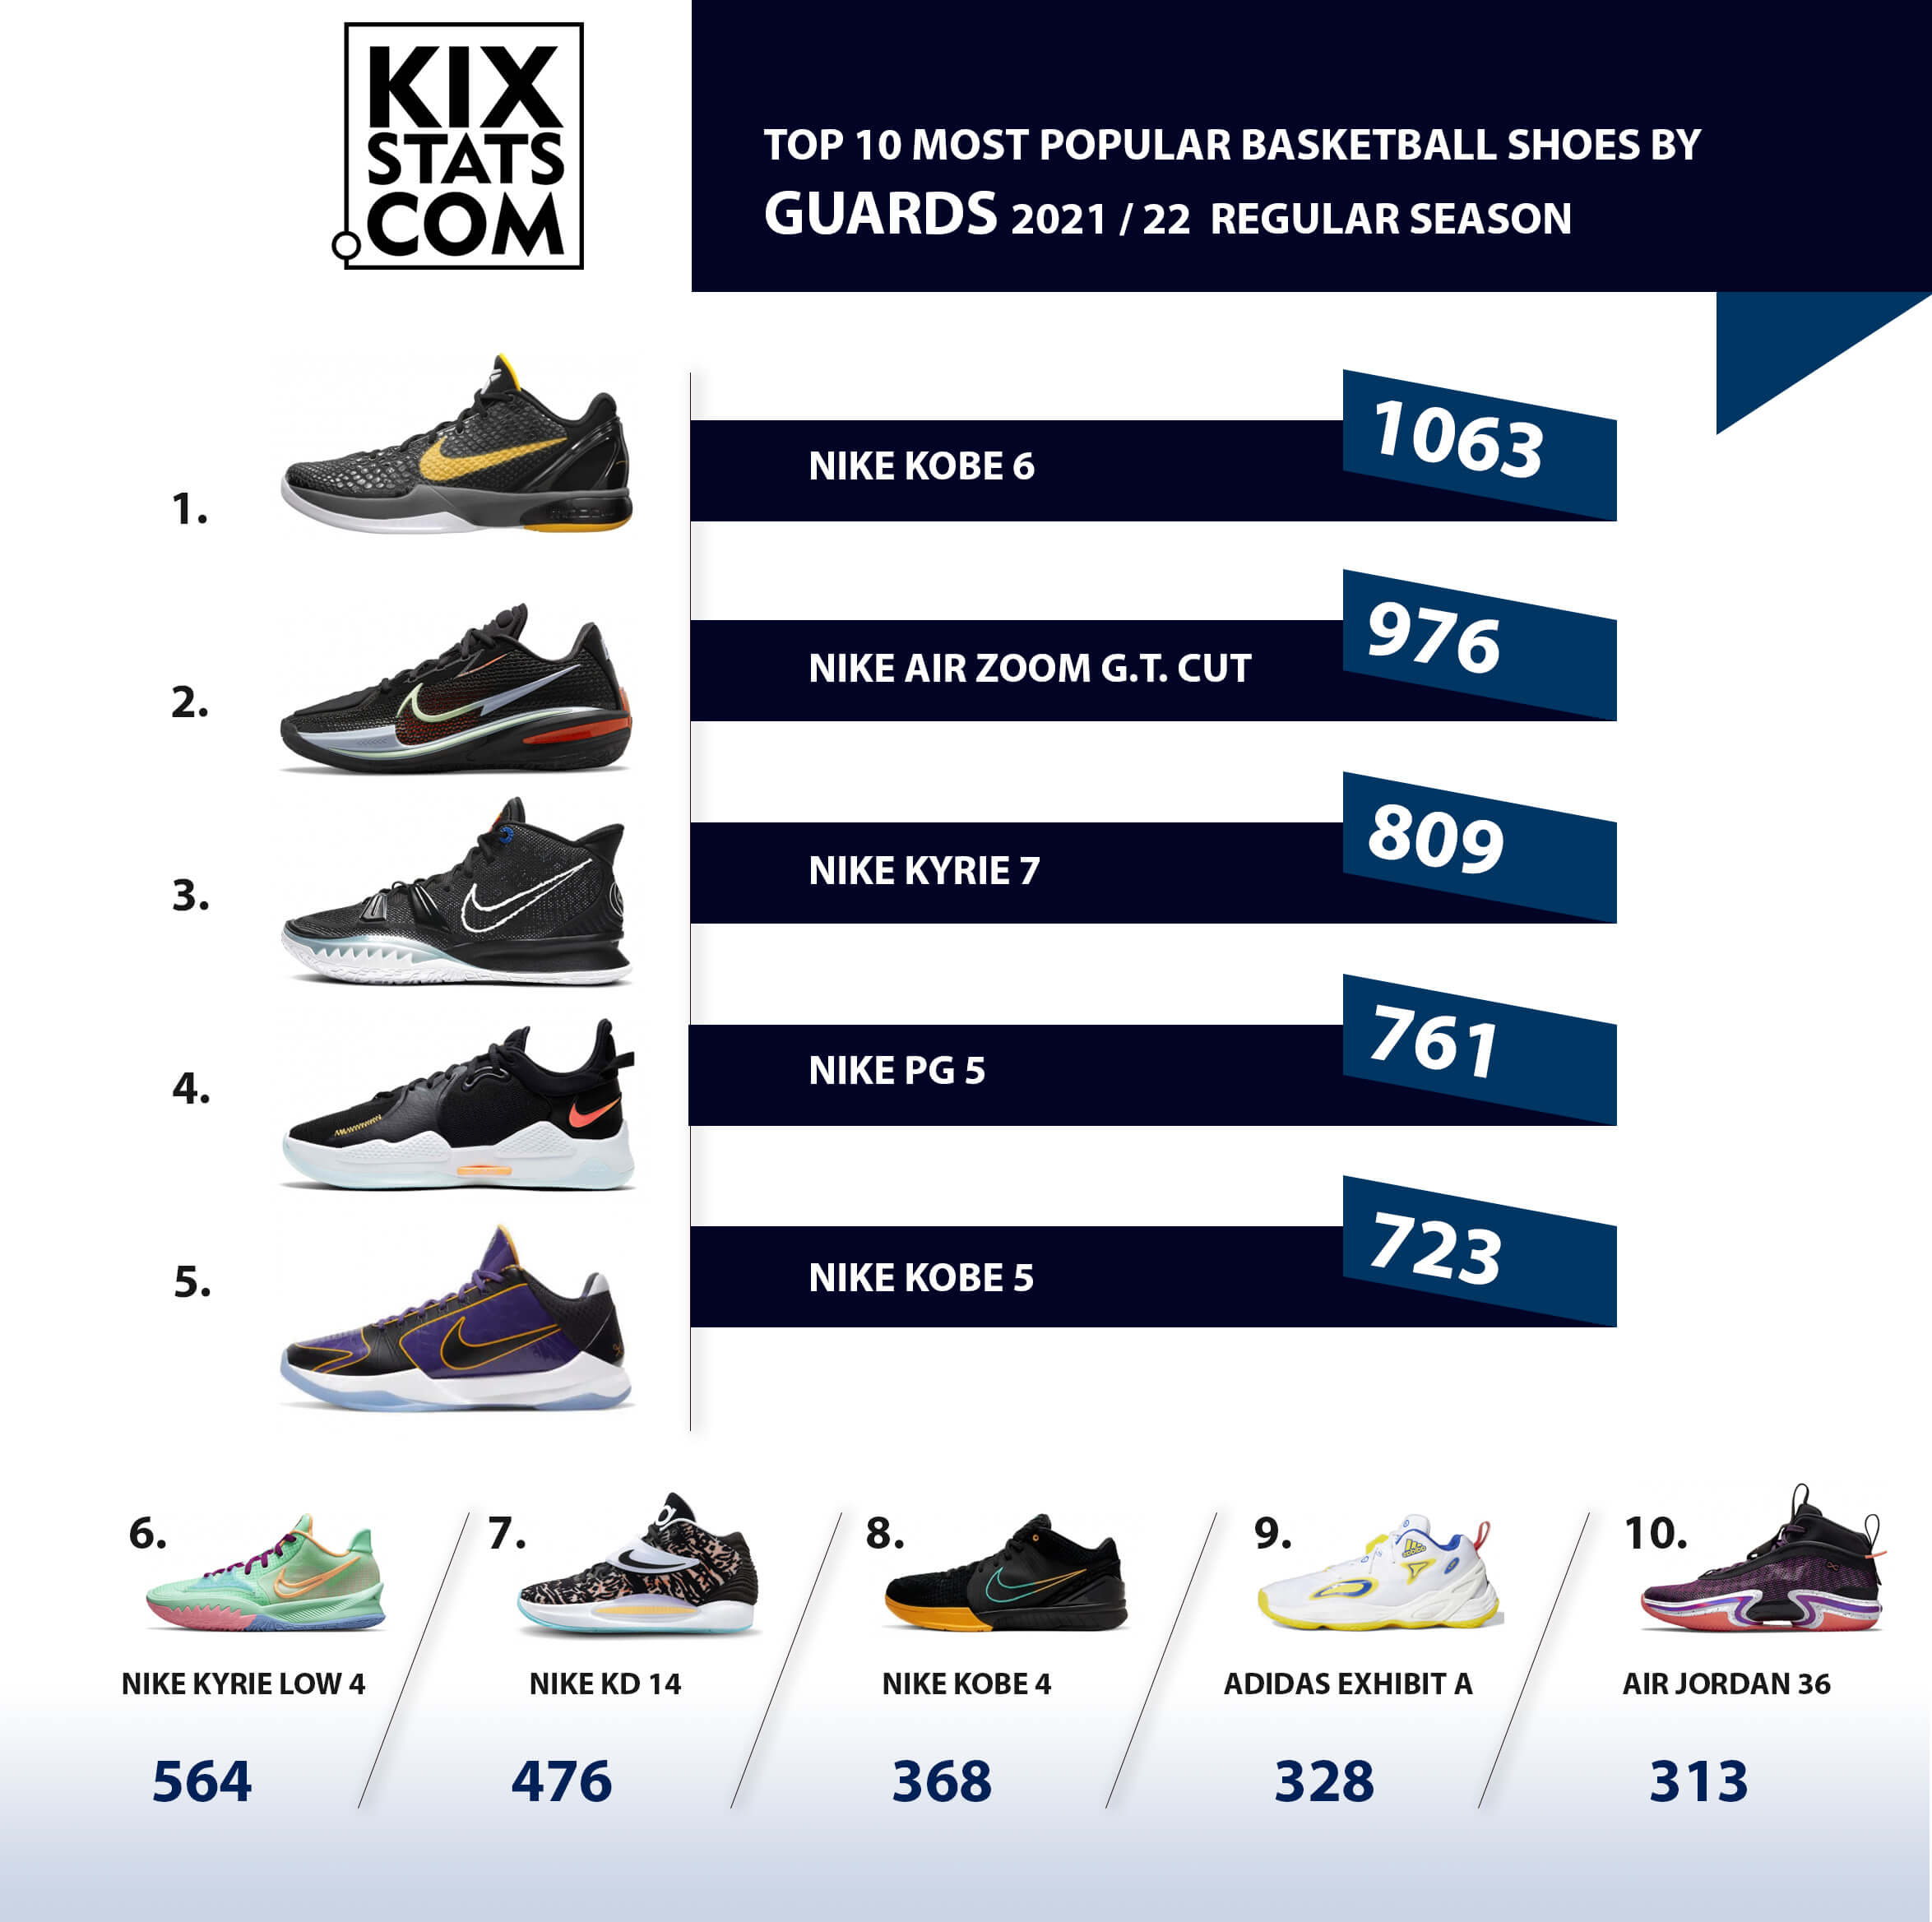 The Best Nike Basketball Shoes for Guards.